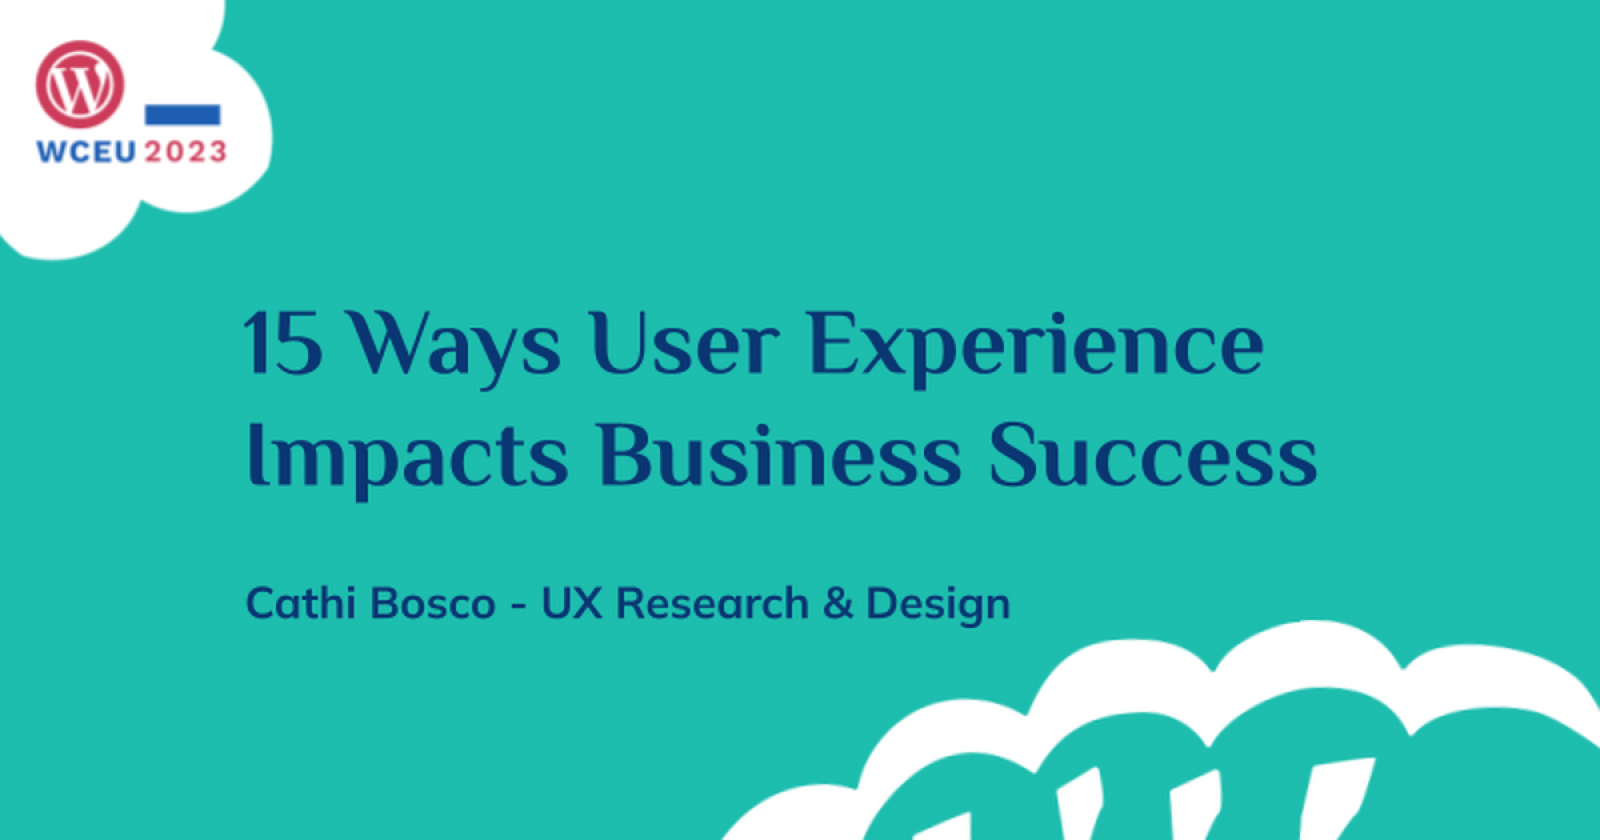 15 ways user experience impacts business success